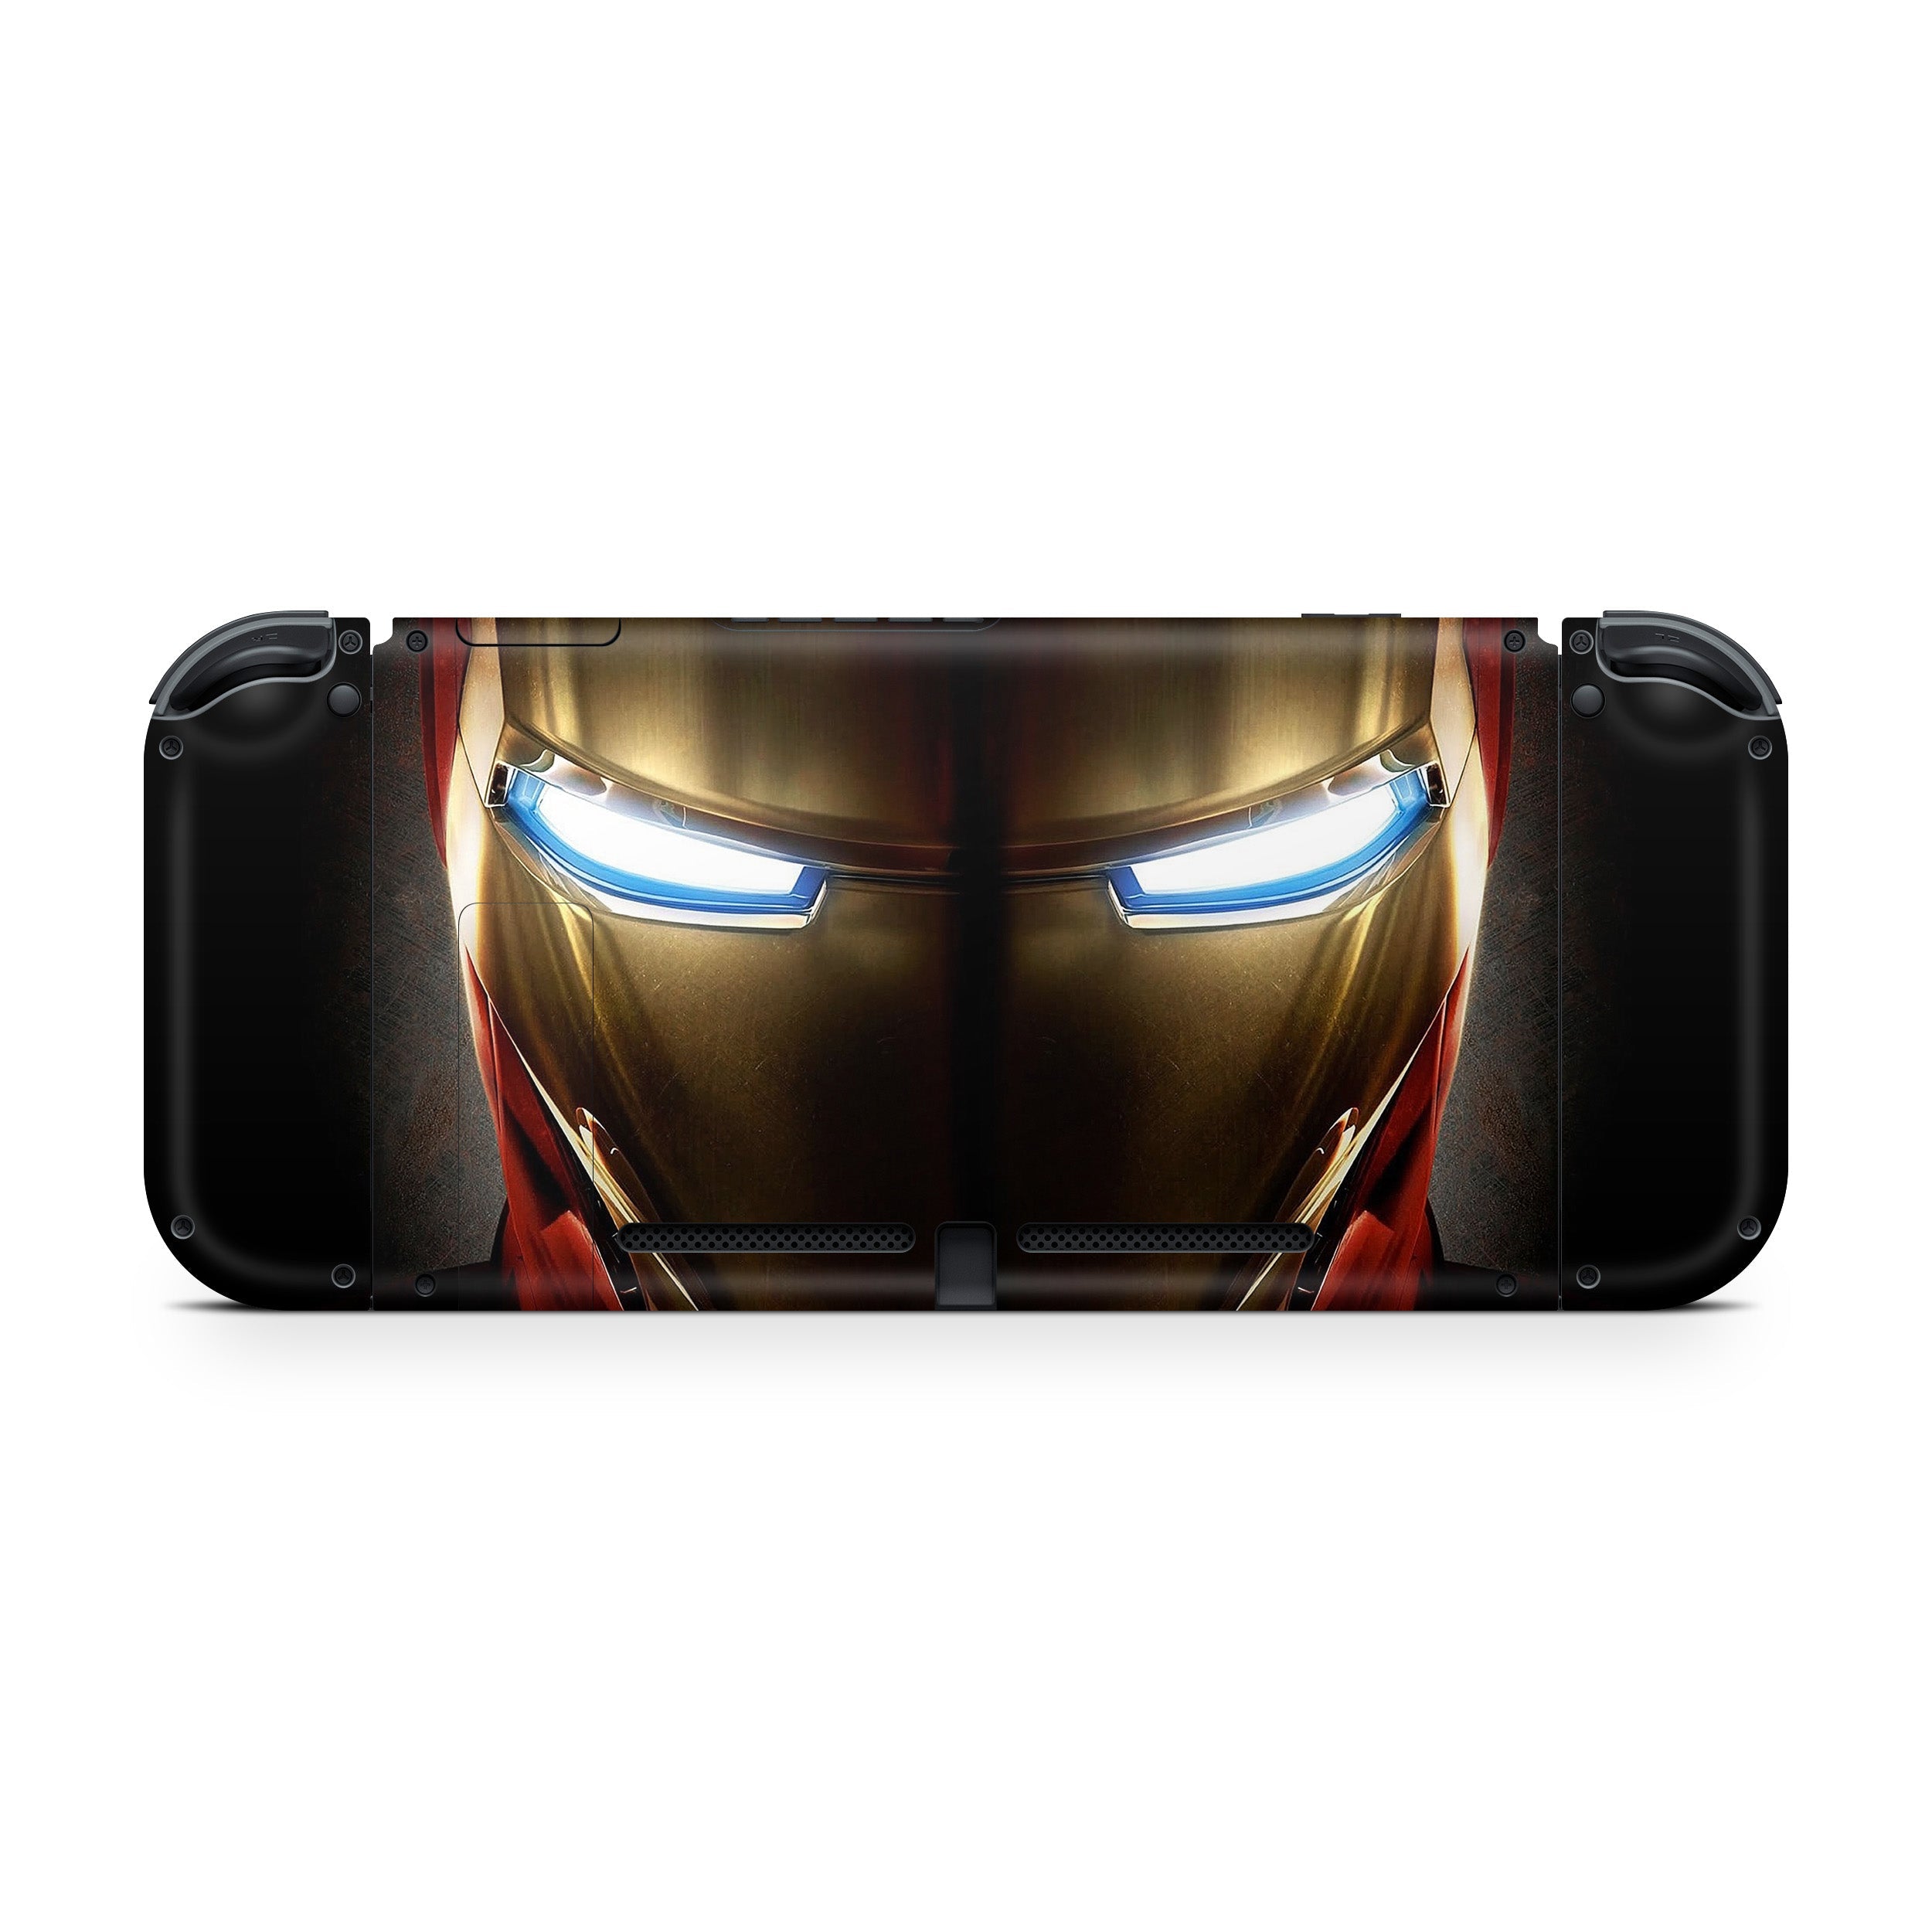 A video game skin featuring a Marvel Iron Man design for the Nintendo Switch.